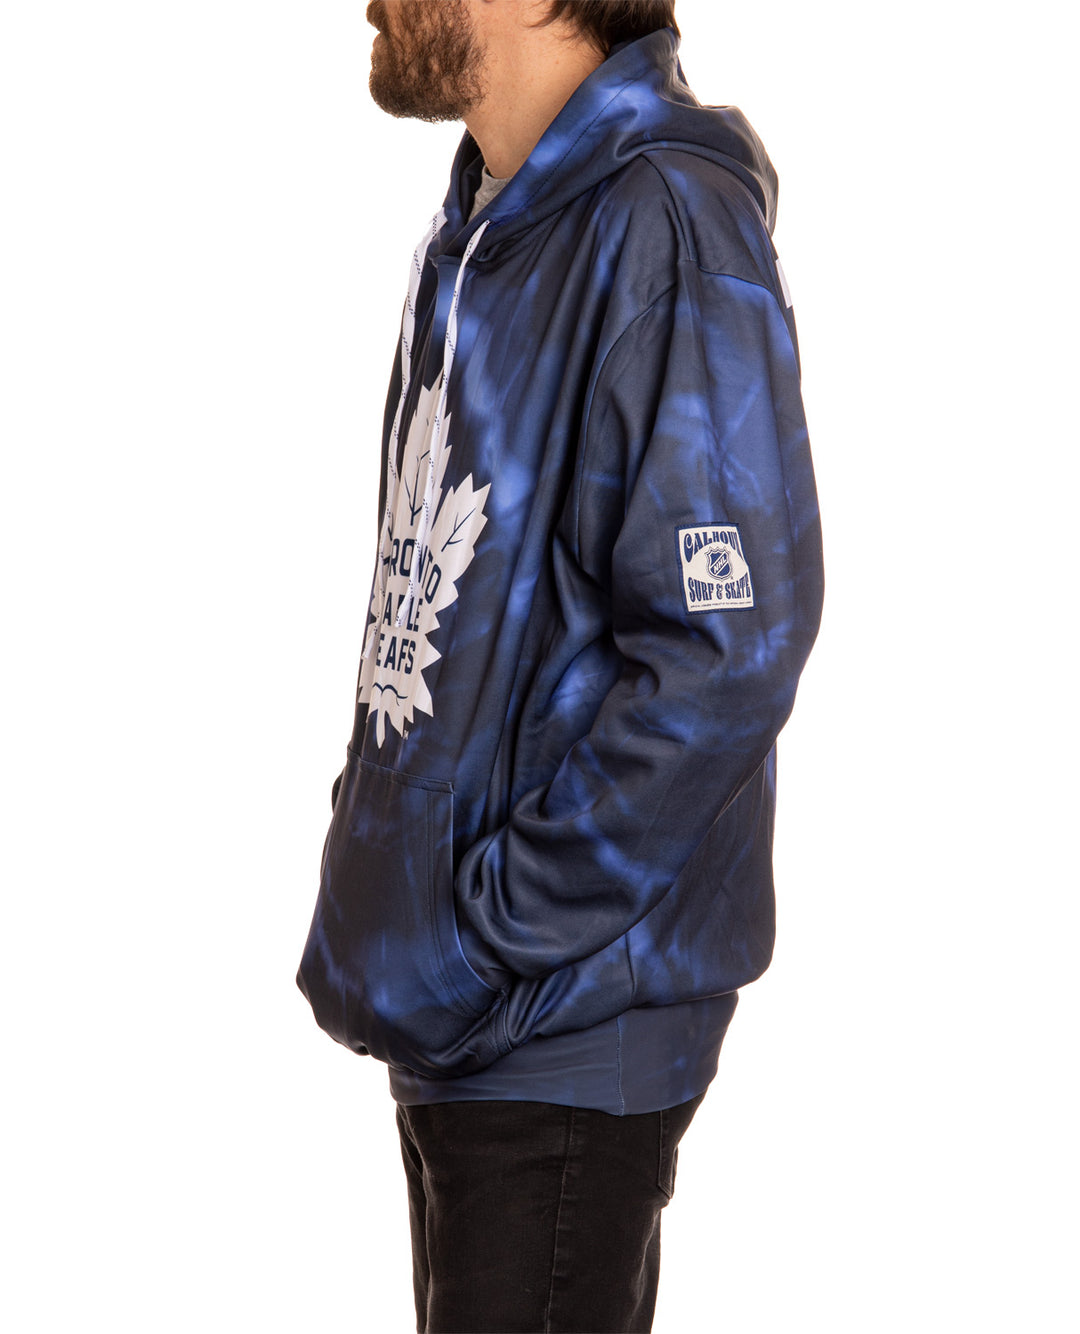 Toronto Maple Leafs Sublimation Hoodie